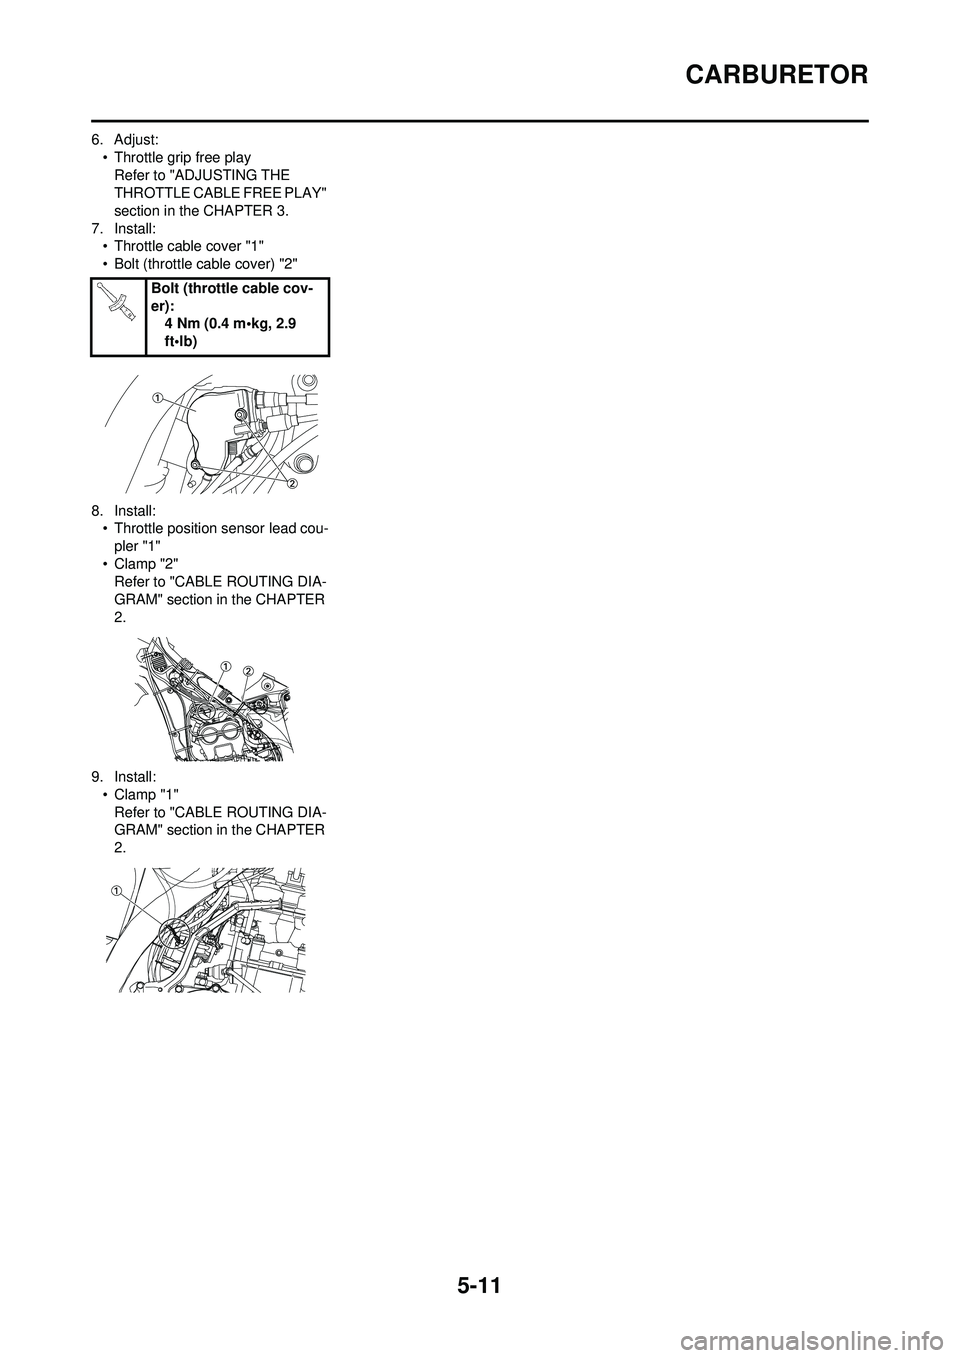 YAMAHA WR 250F 2009  Owners Manual 5-11
CARBURETOR
6. Adjust:• Throttle grip free playRefer to "ADJUSTING THE 
THROTTLE CABLE FREE PLAY" 
section in the CHAPTER 3.
7. Install: • Throttle cable cover "1"
• Bolt (throttle cable cov